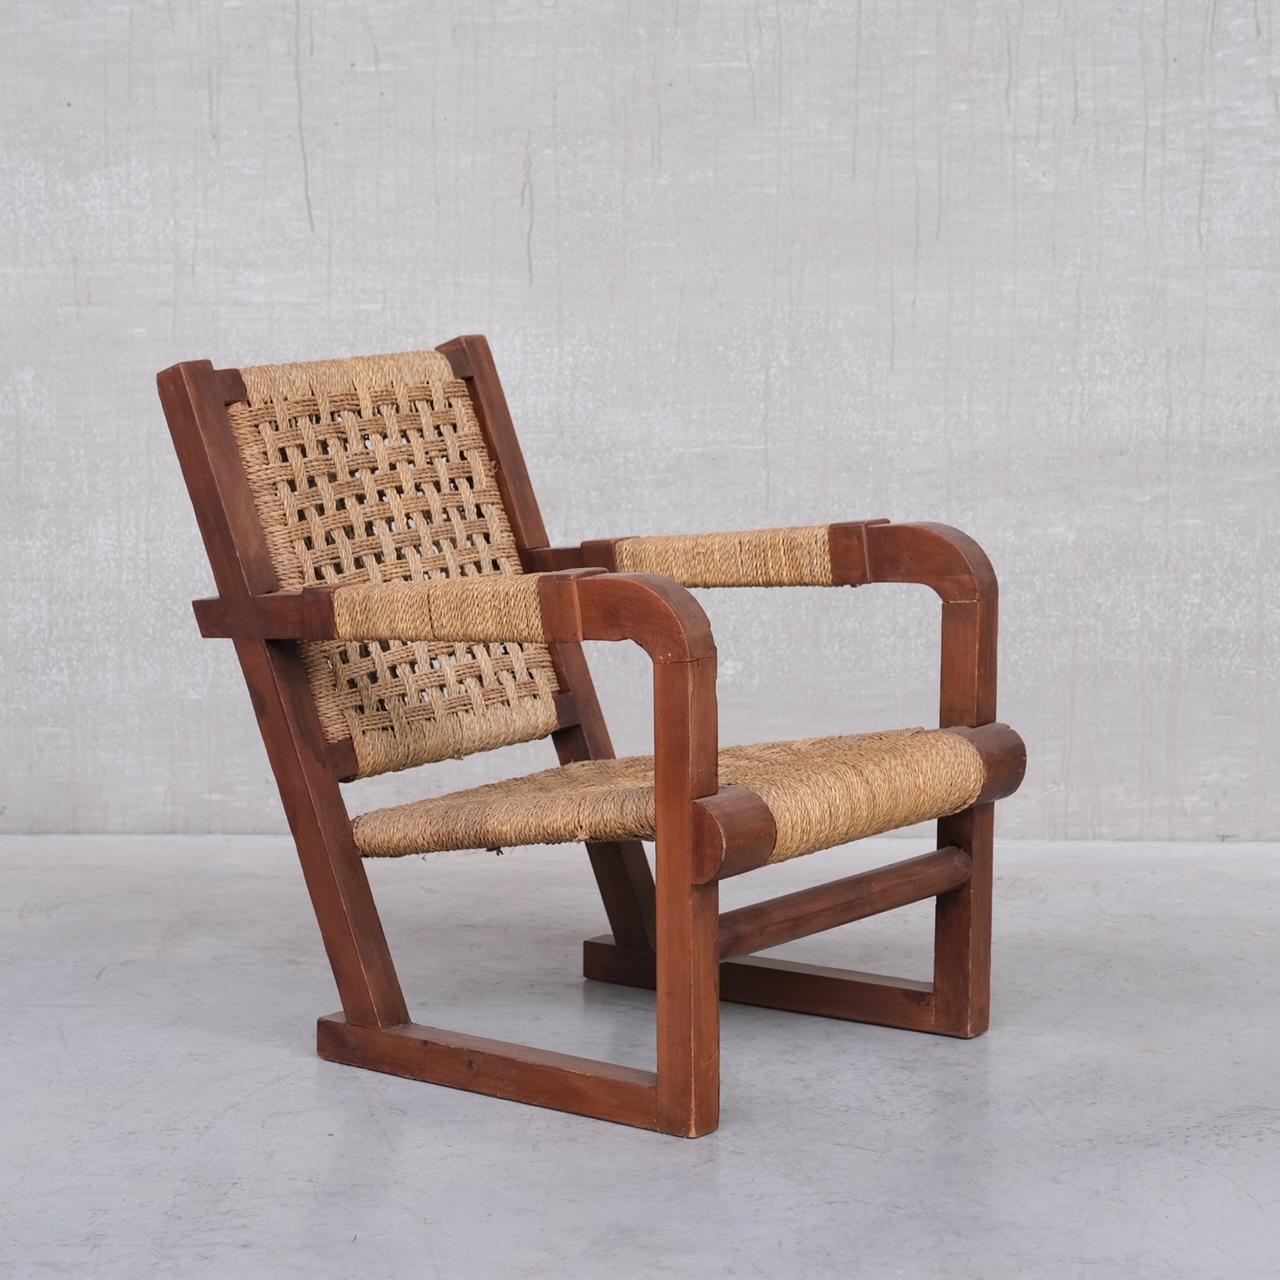 A rope work wooden armchair attributed to Francis Jourdain. 

France, c1930s. 

Woven cord. 

Good condition generally, some knocks and wear to the wood commensurate with age. 

Location: Belgium Gallery. 

Dimensions: 62 W x 77 D x 38